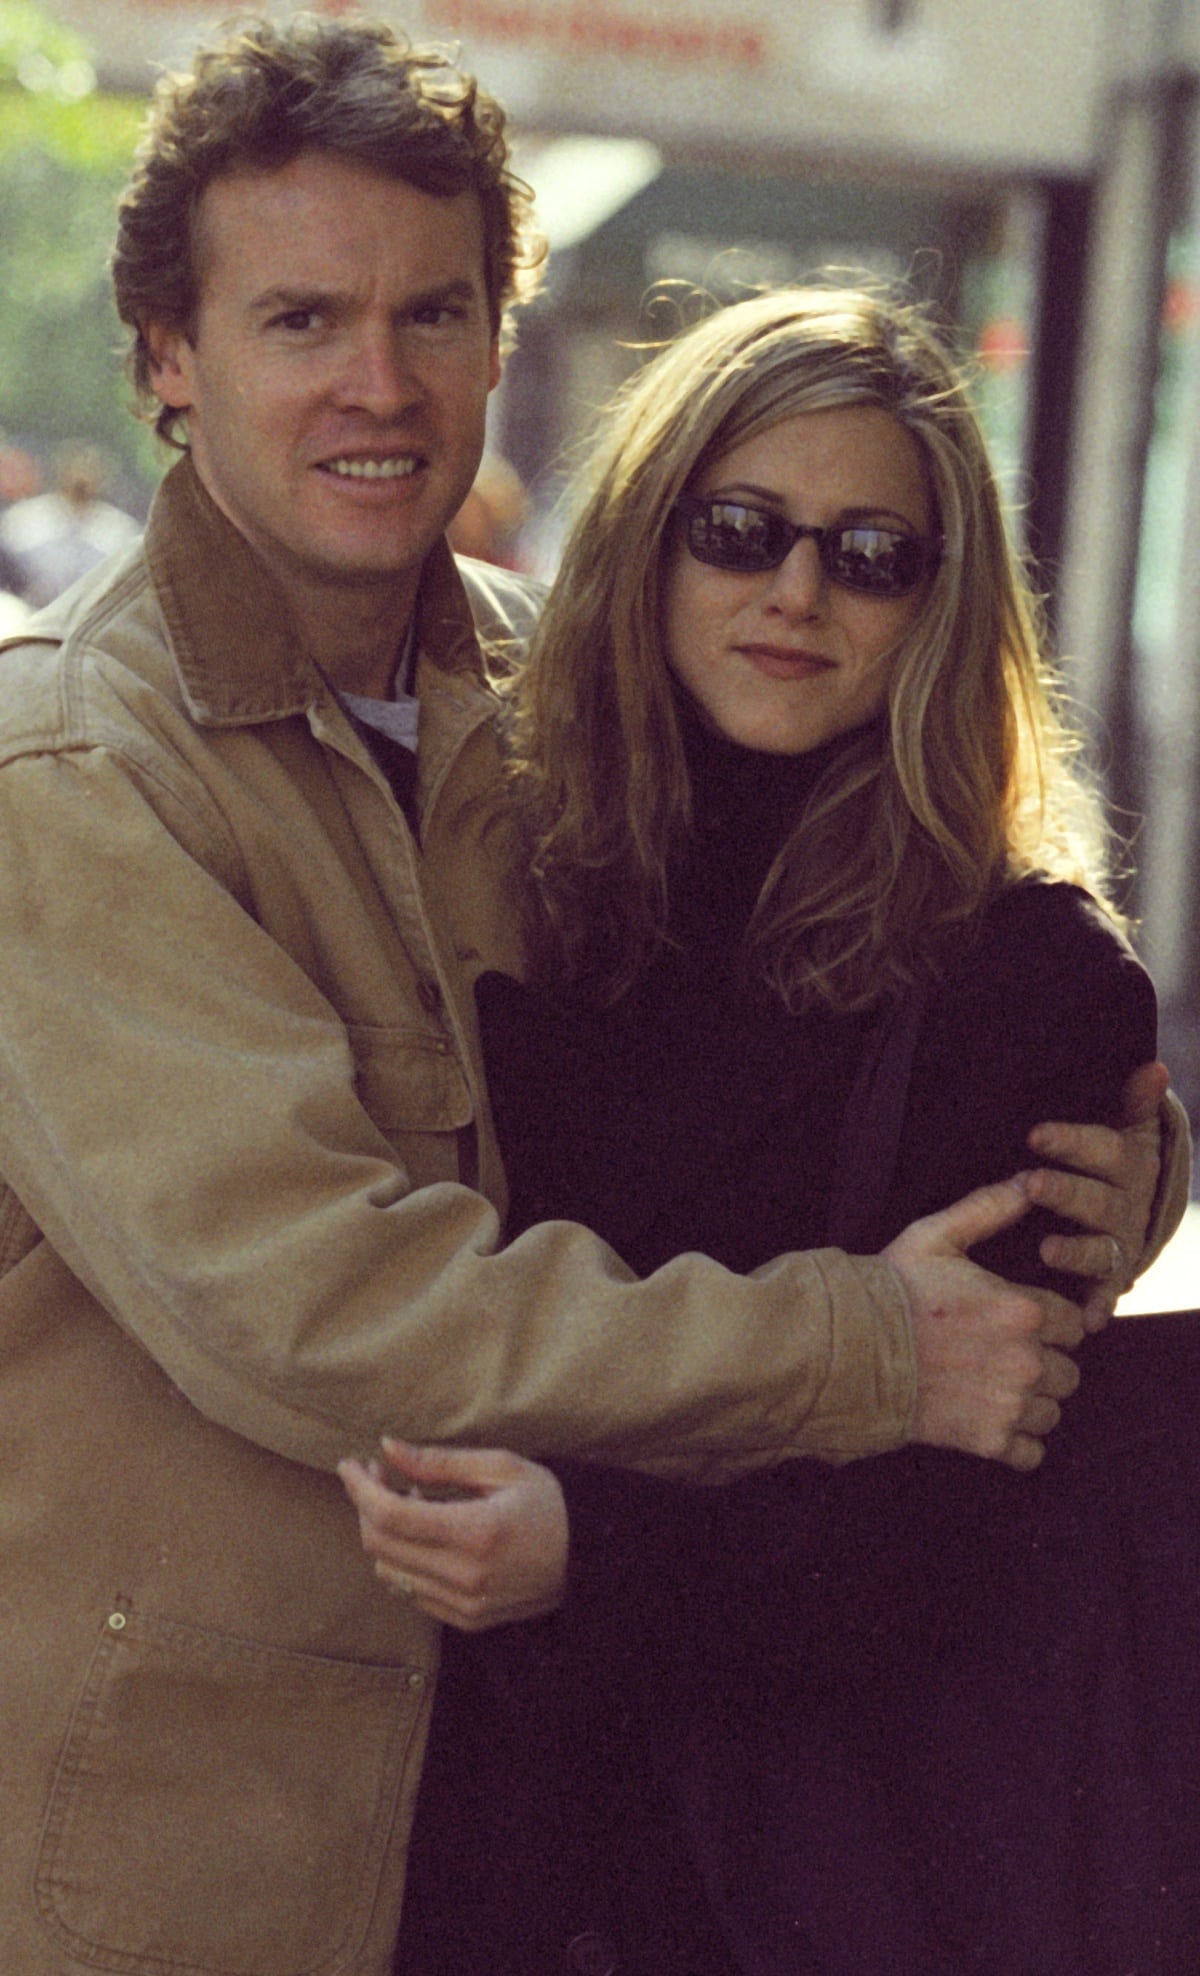 Jennifer Aniston and Tate Donovan dated for about three years, from 1995 to 1998